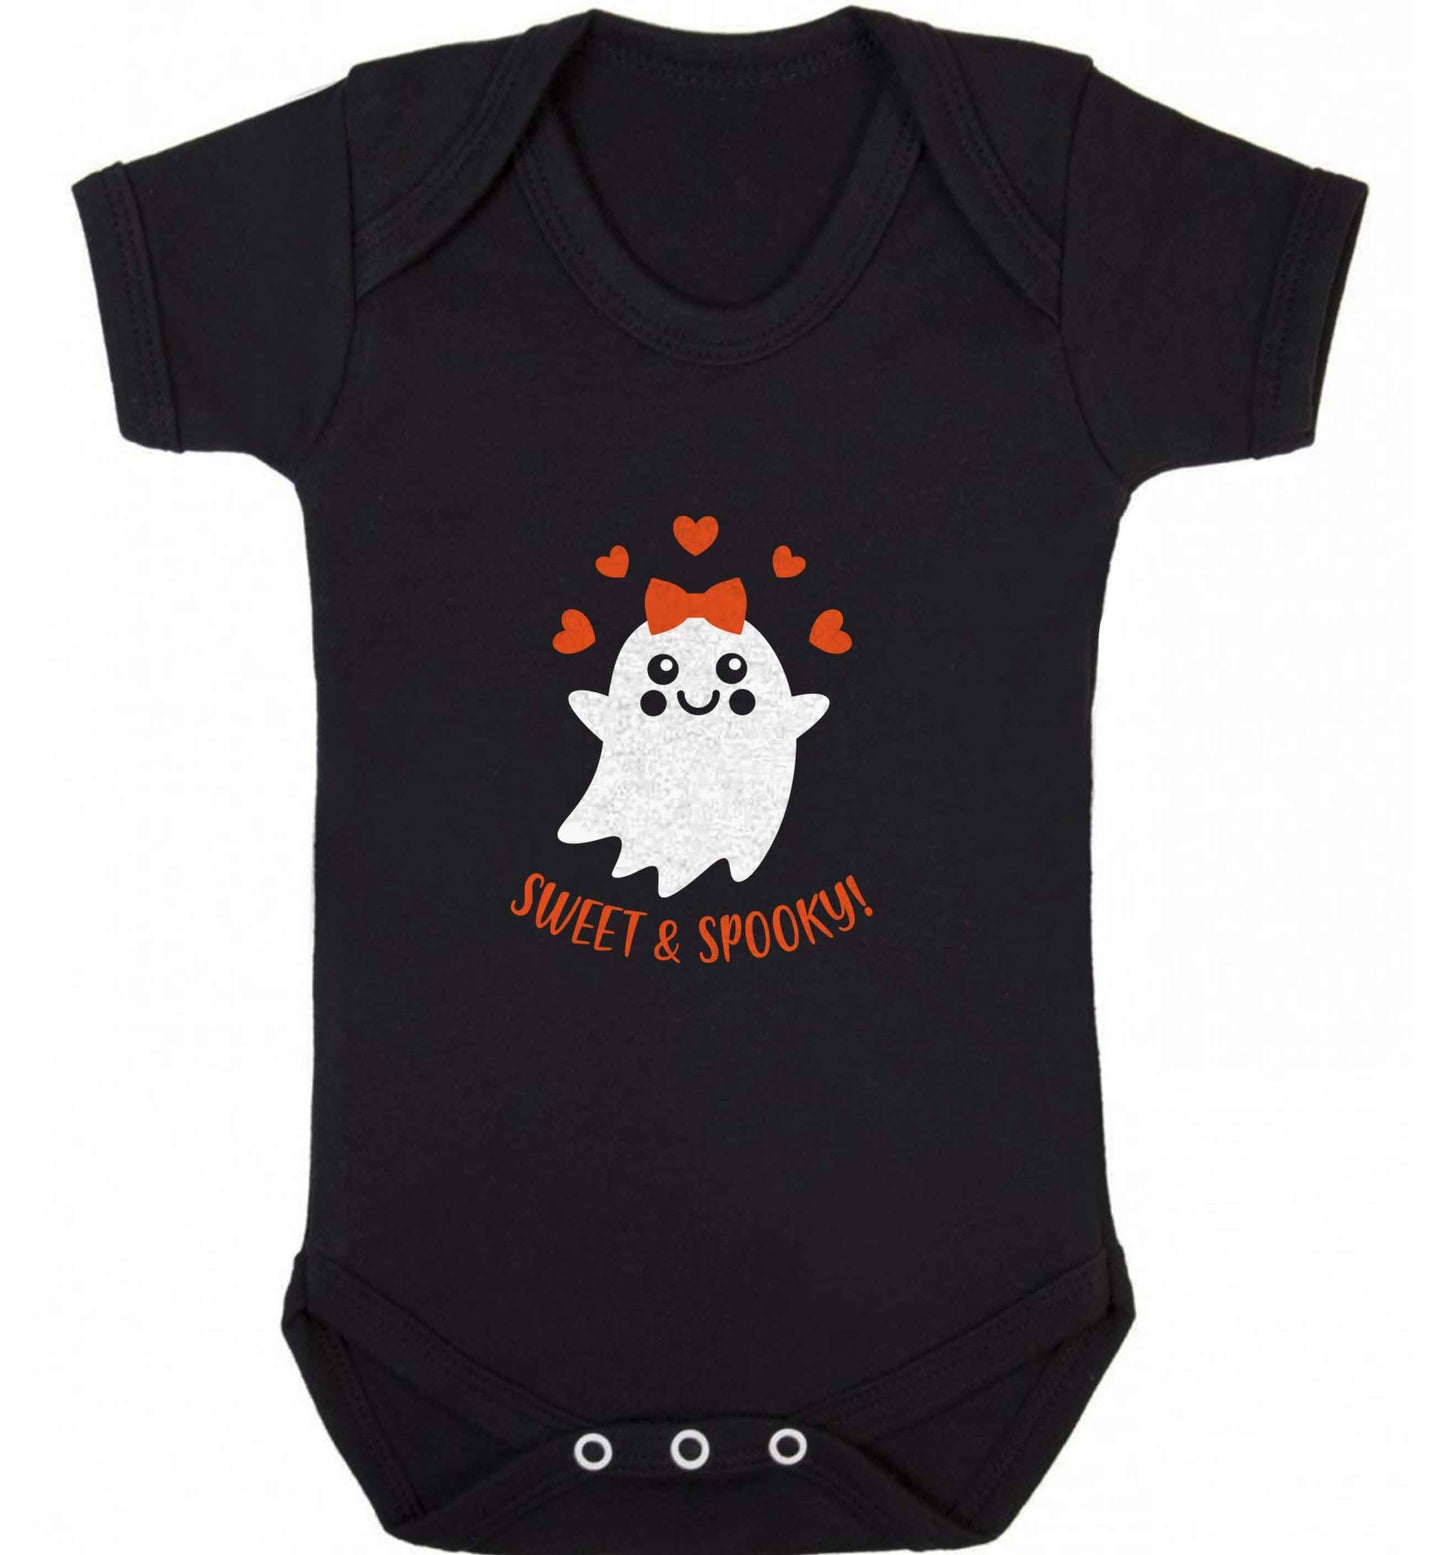 Sweet and spooky baby vest black 18-24 months